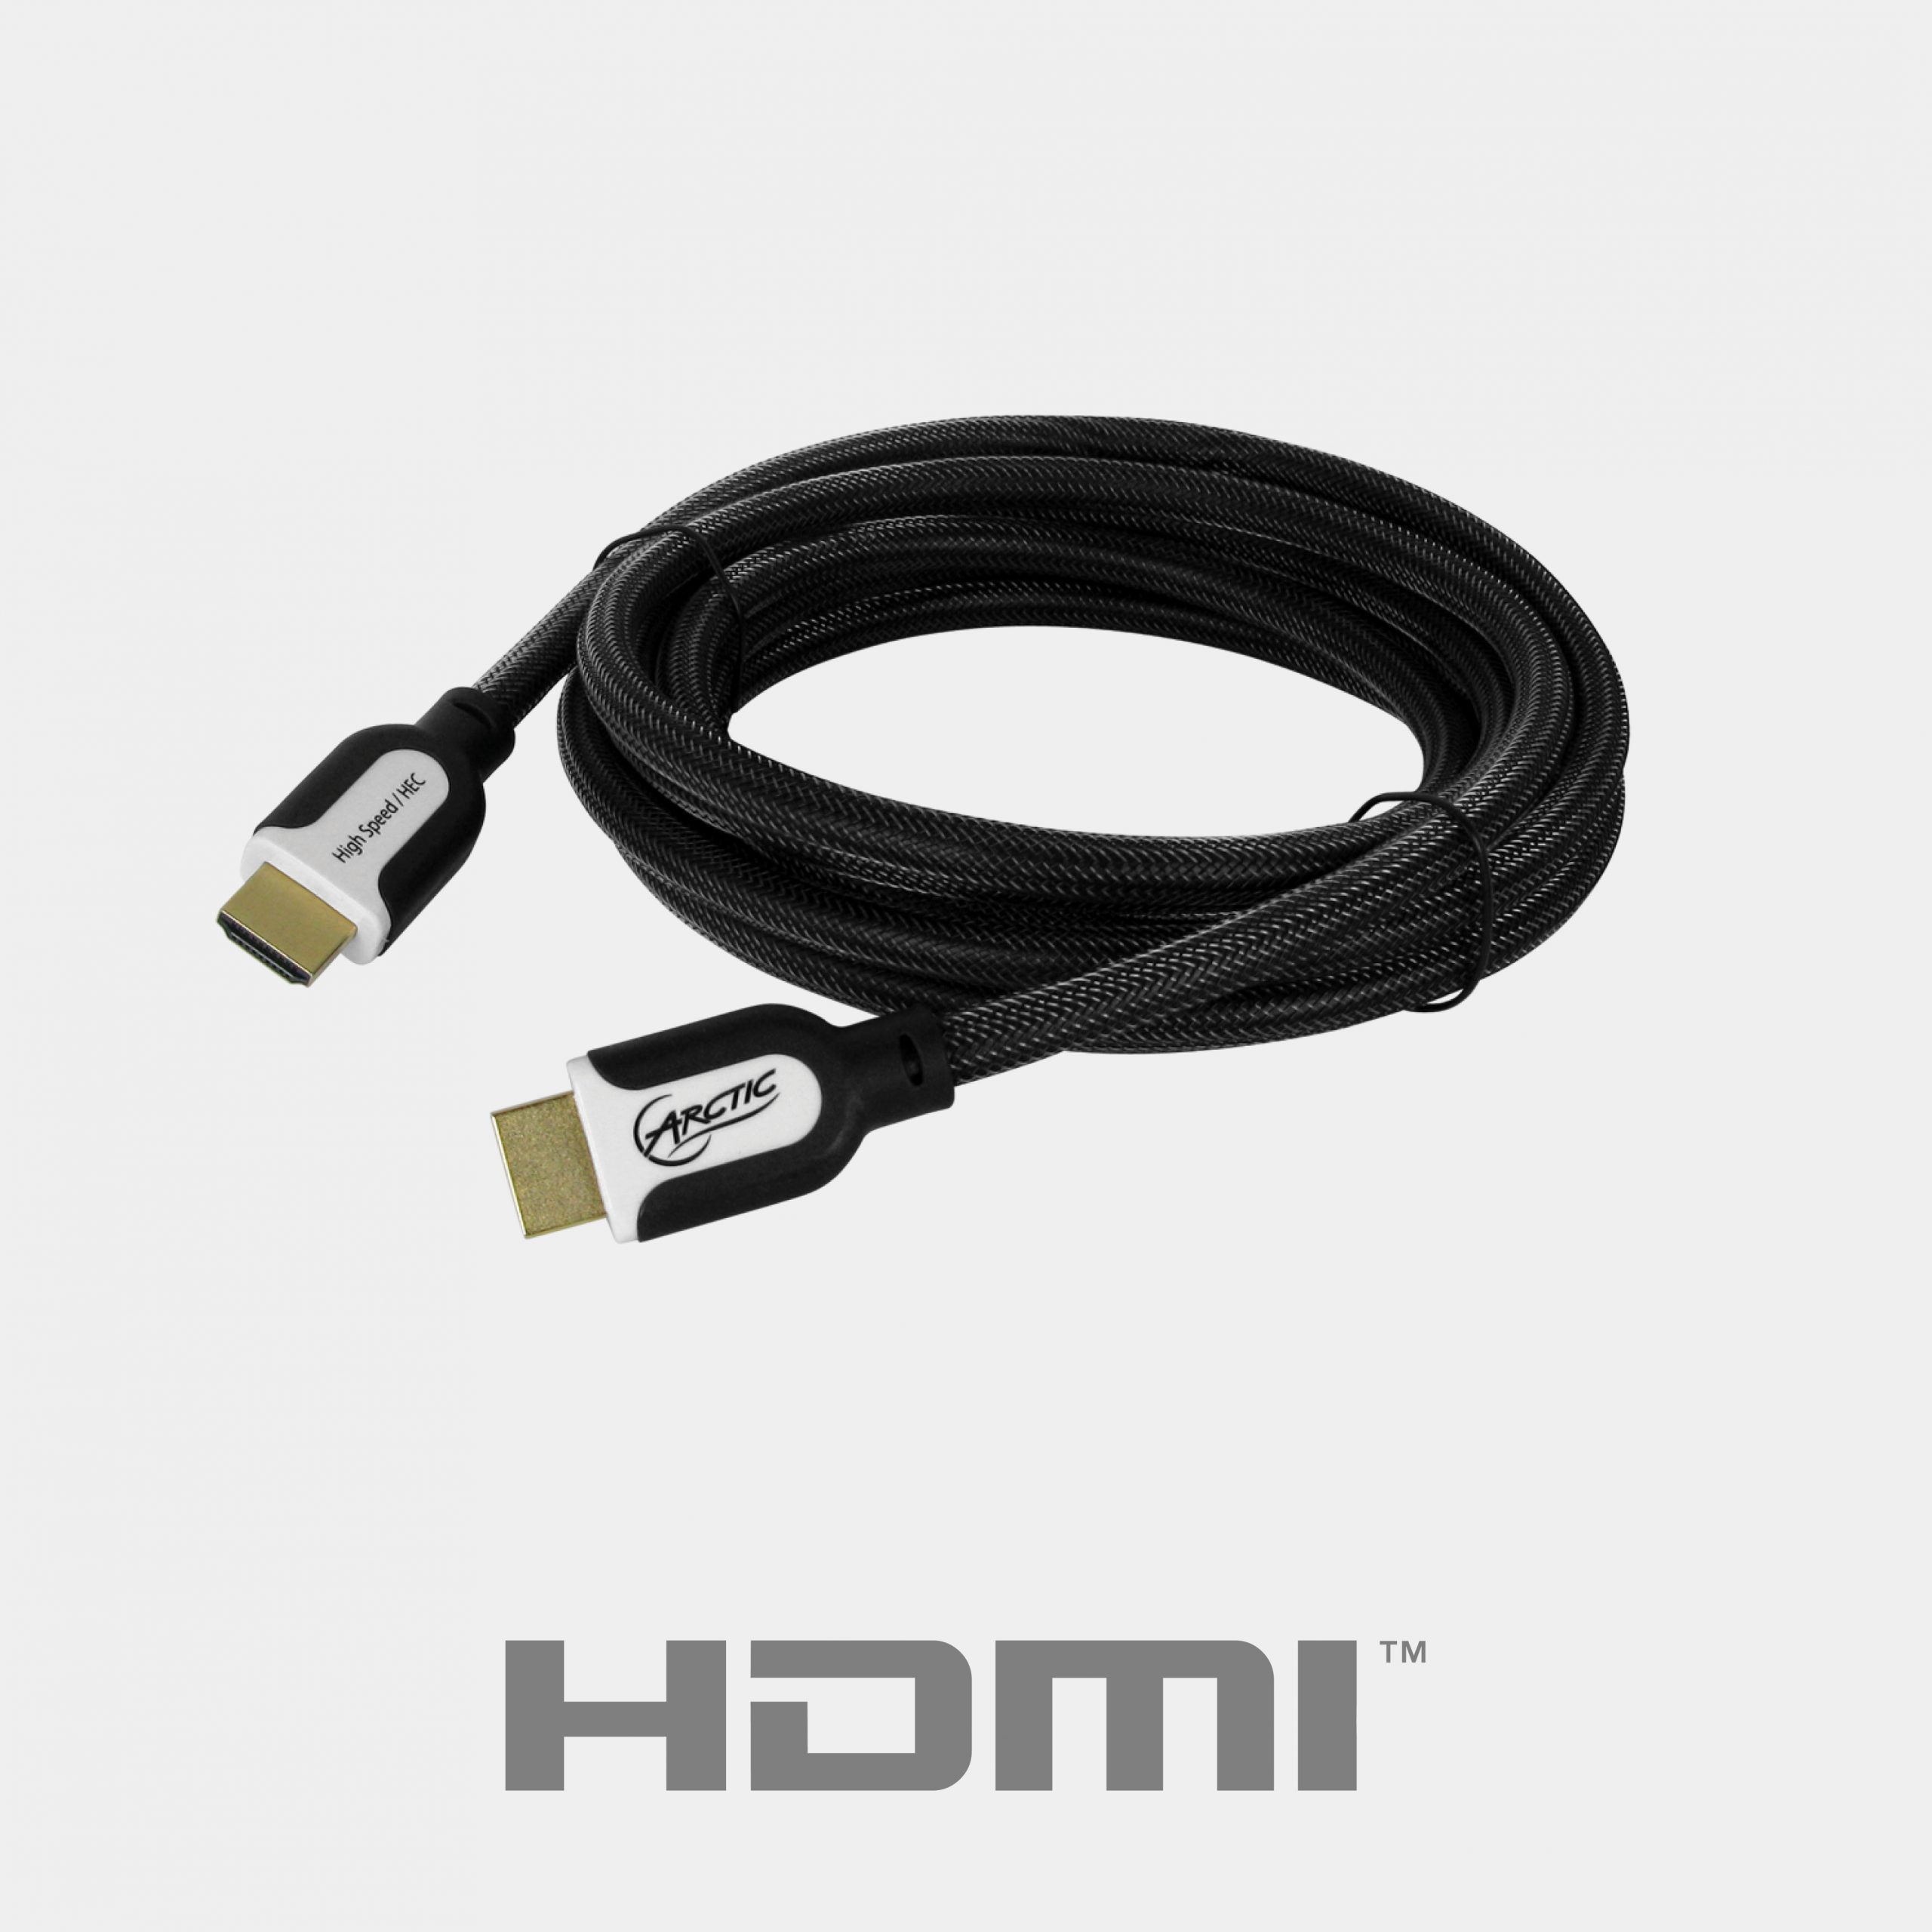 Stream using an HDMI cable